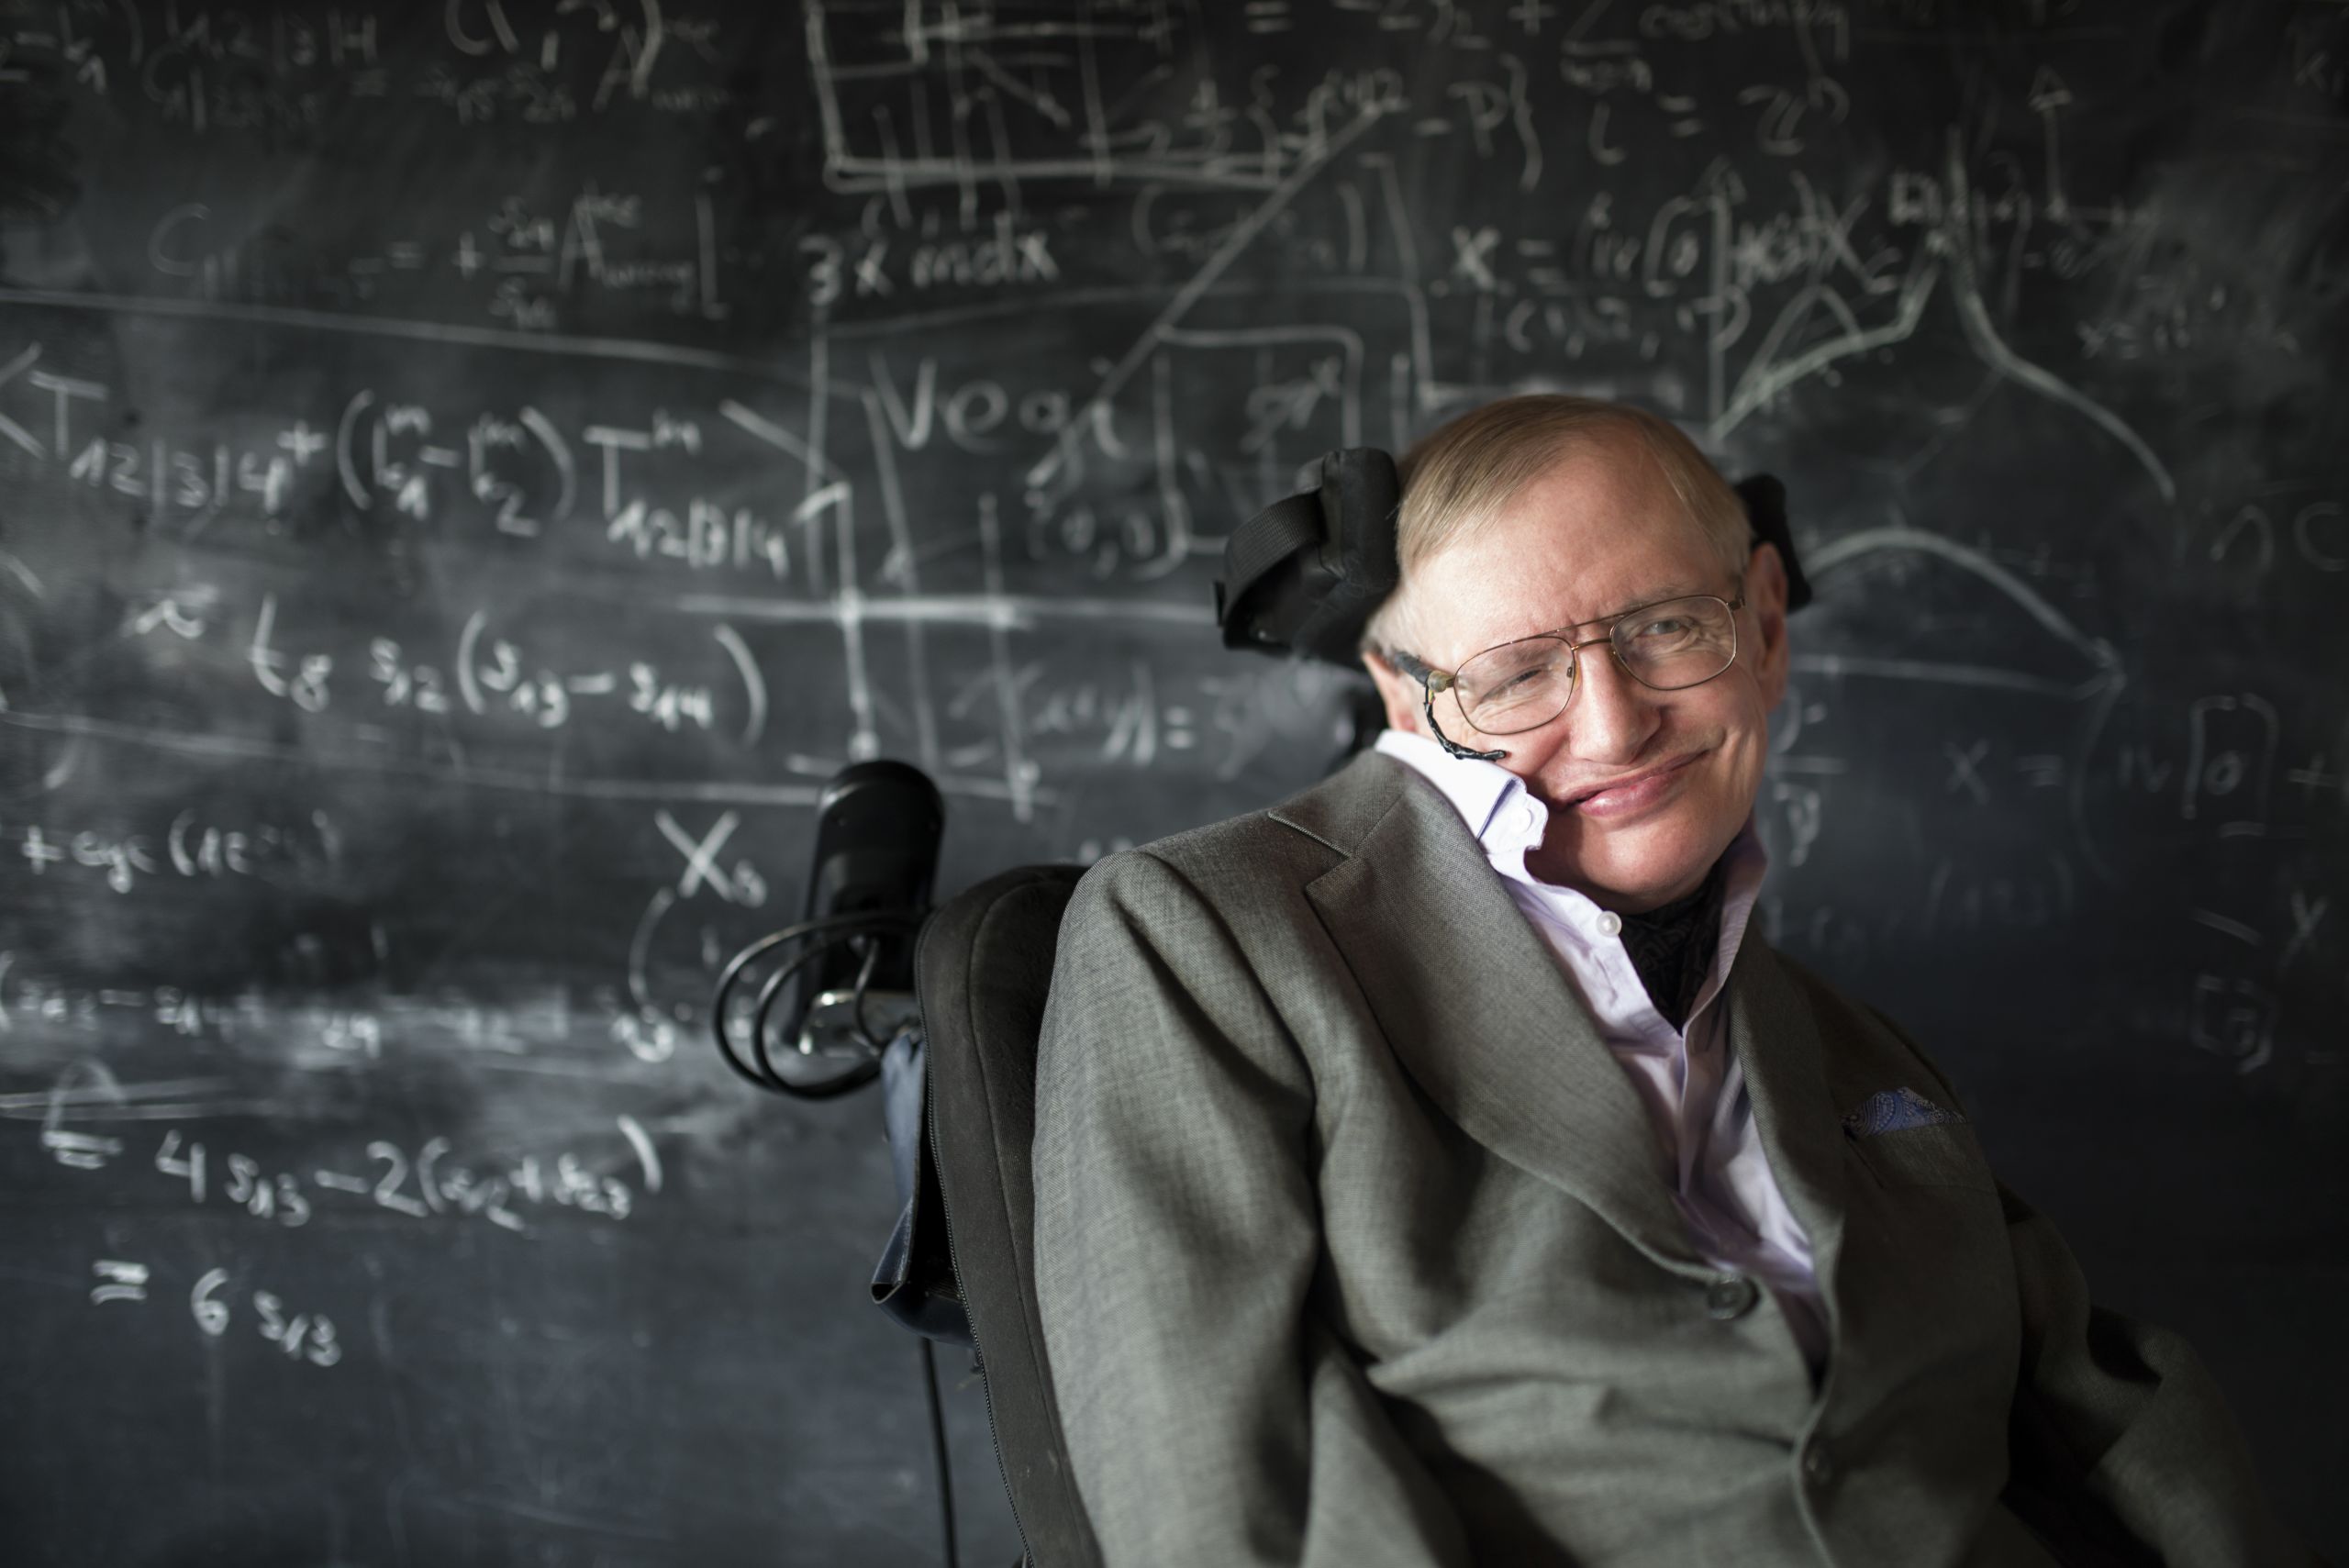 Professor Hawking pictured at the Department of Applied Mathematics and Theoretical Physics, University of Cambridge. Credit: Andre Pattenden